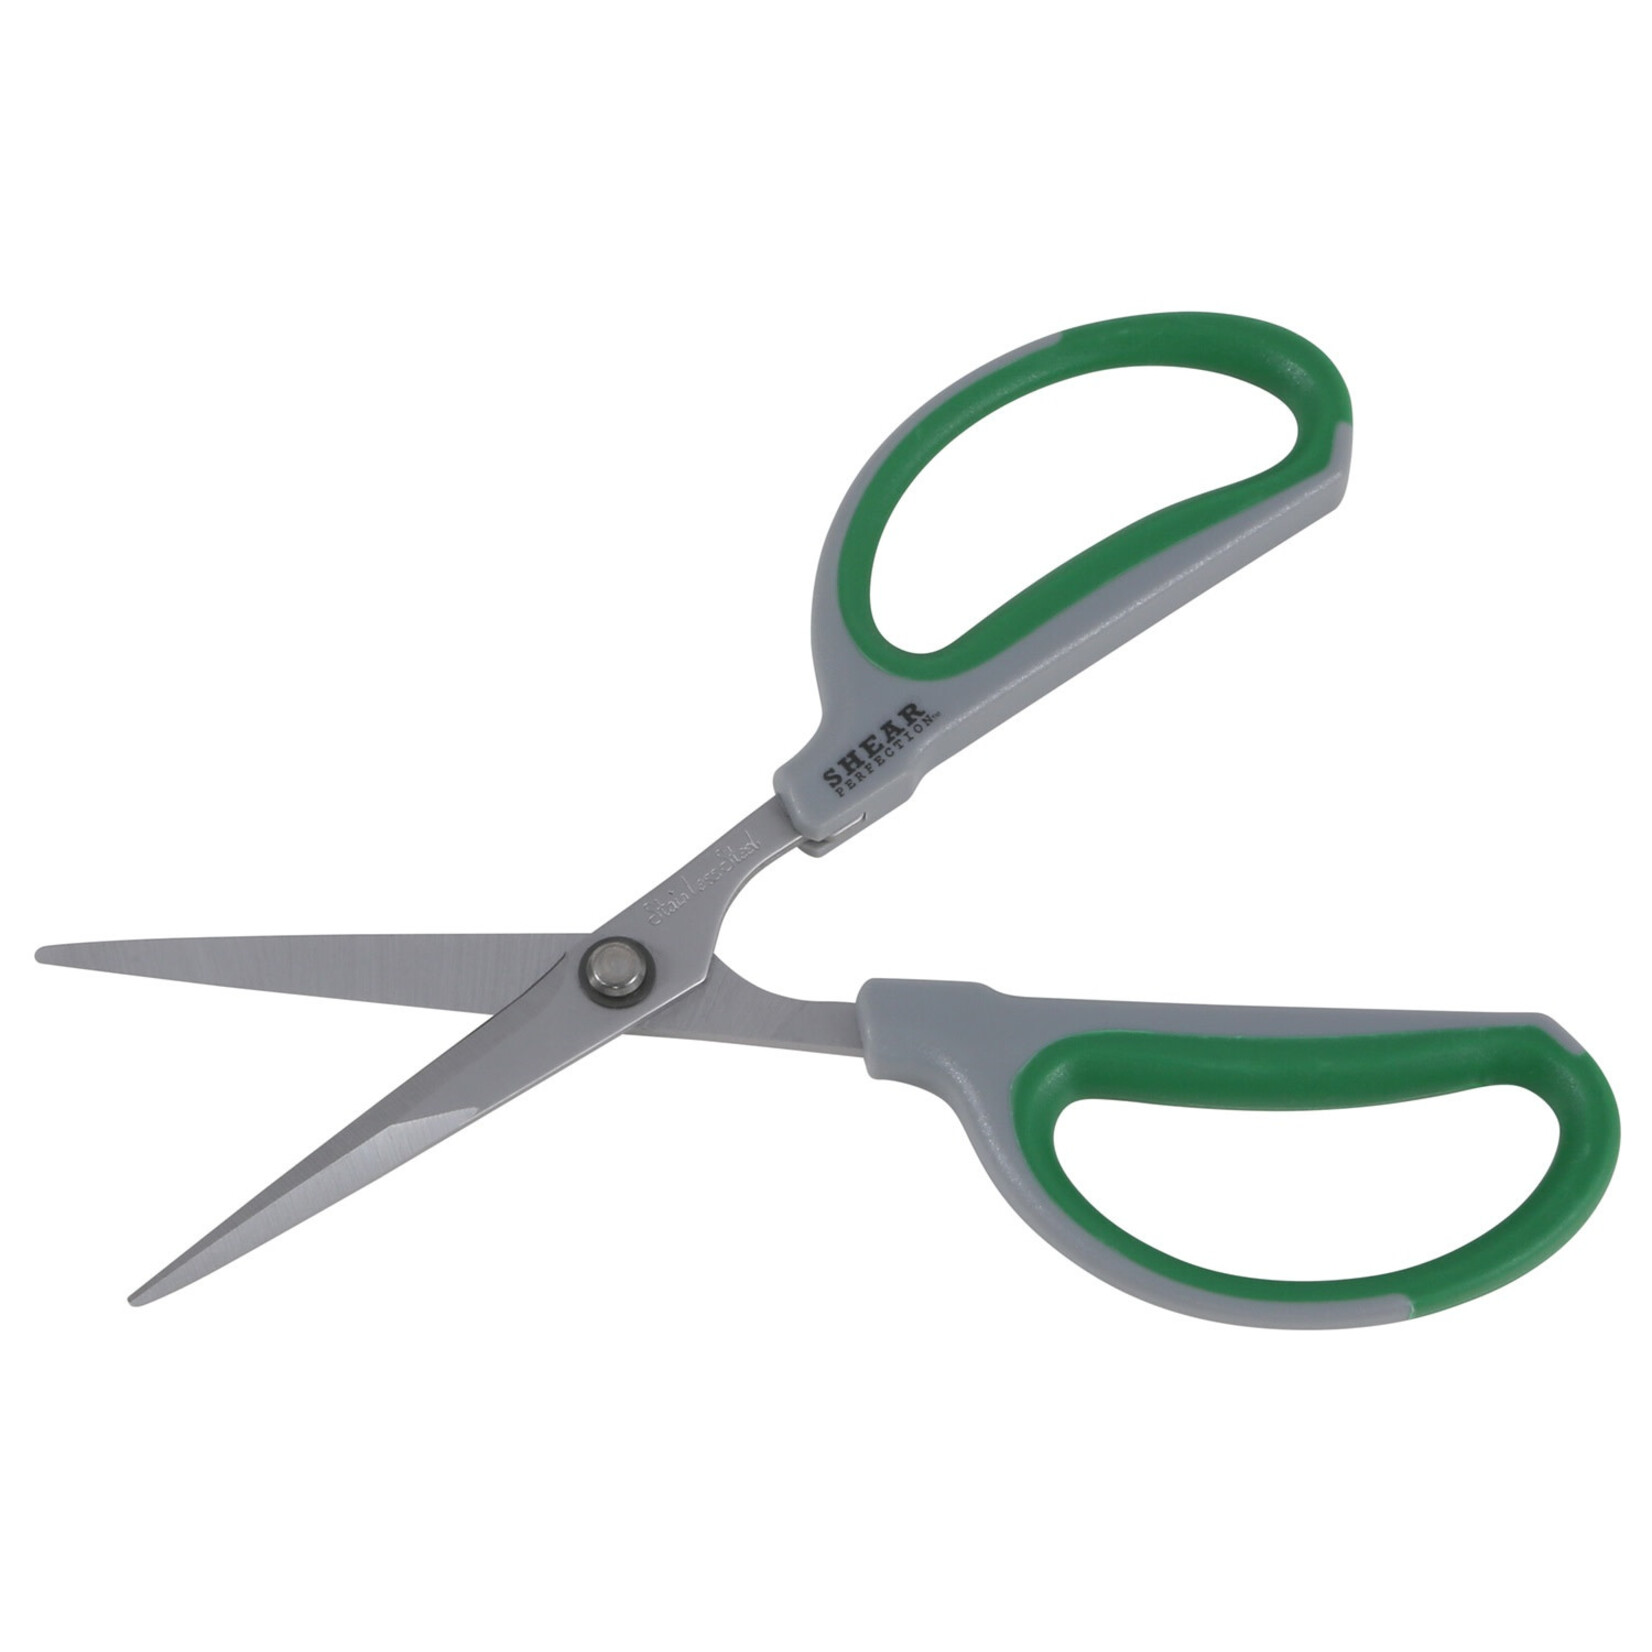 Shear Perfection Shear Perfection Platinum Stainless Steel Bonsai Scissors - 1.5 in Blades